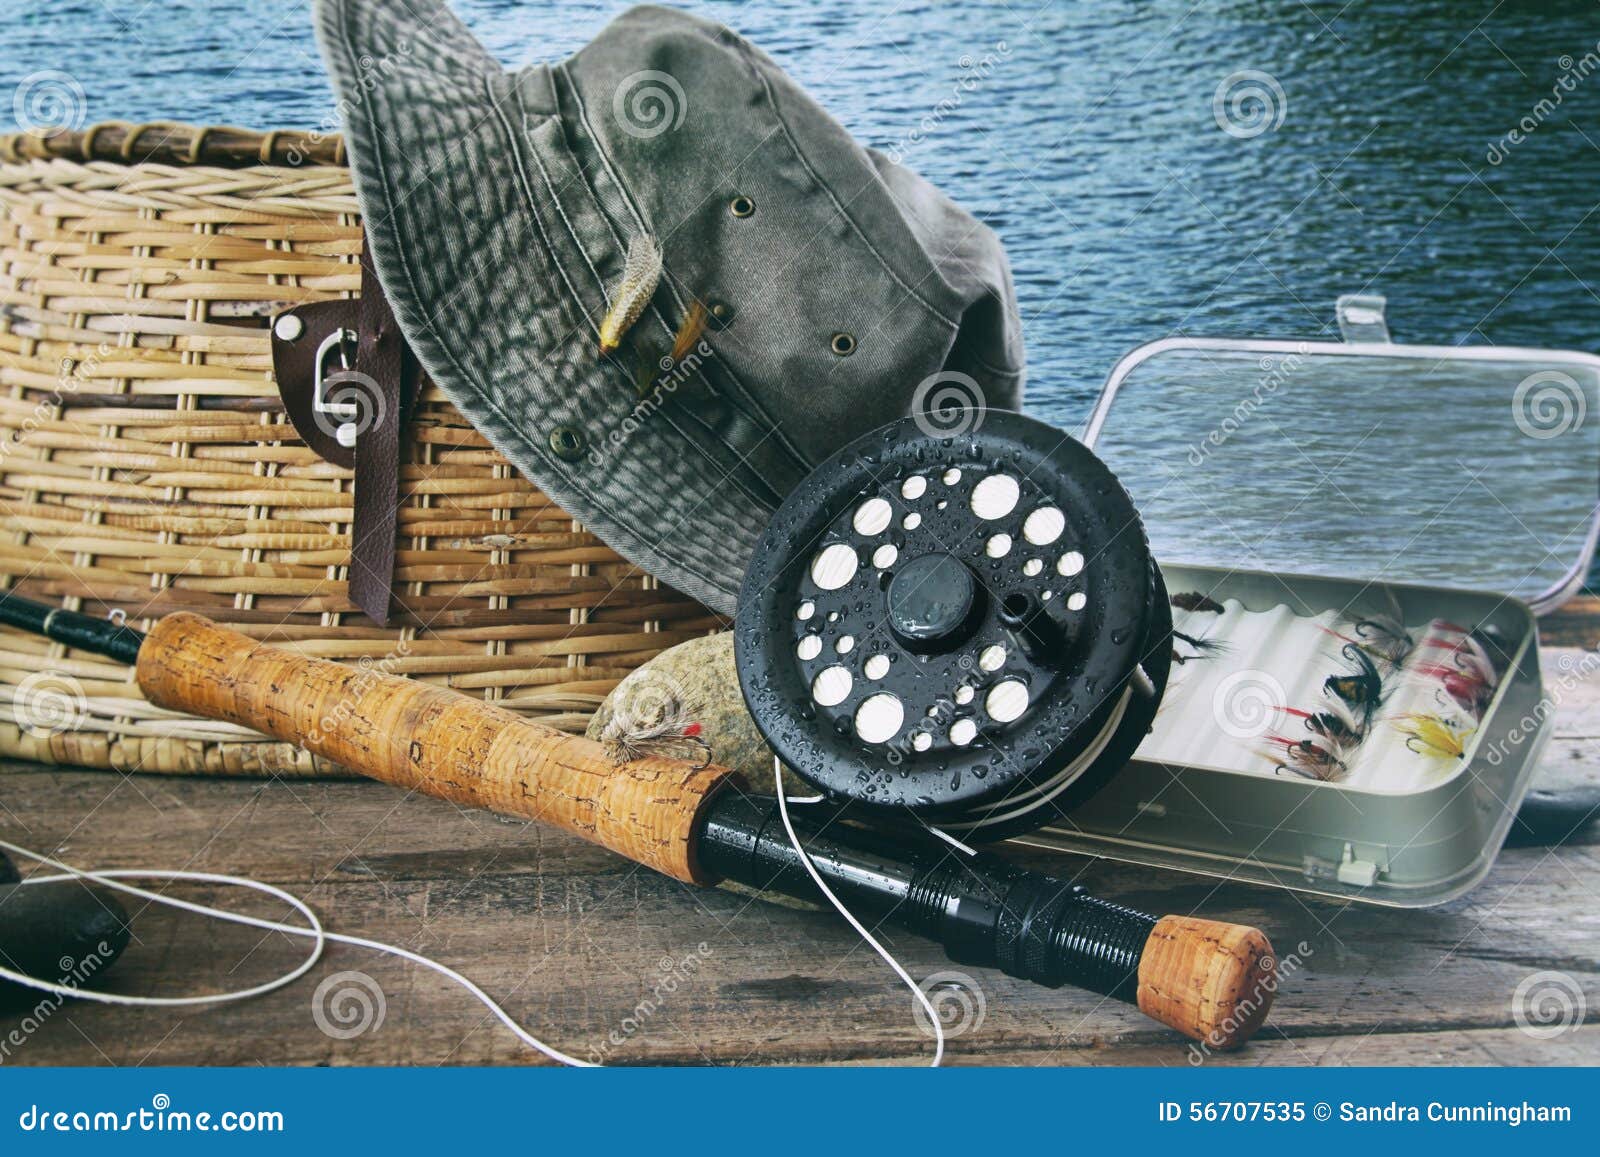 Fishing Gear Stock Photos - 64,494 Images